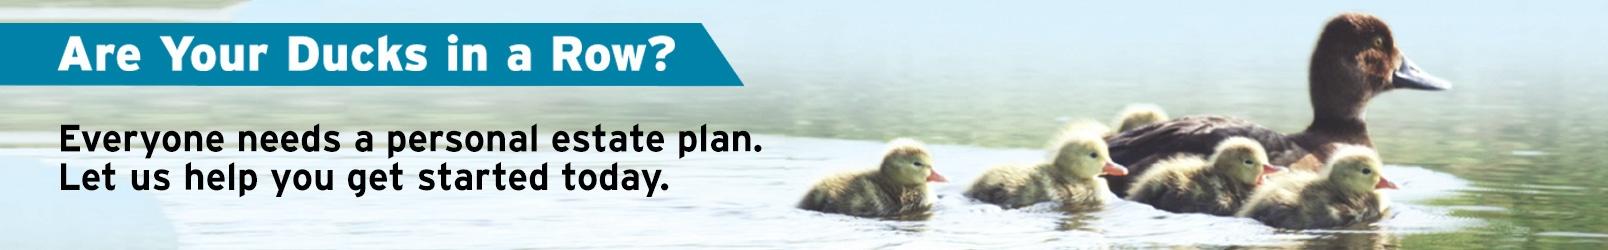 Are Your Ducks in a Row? Planned Giving